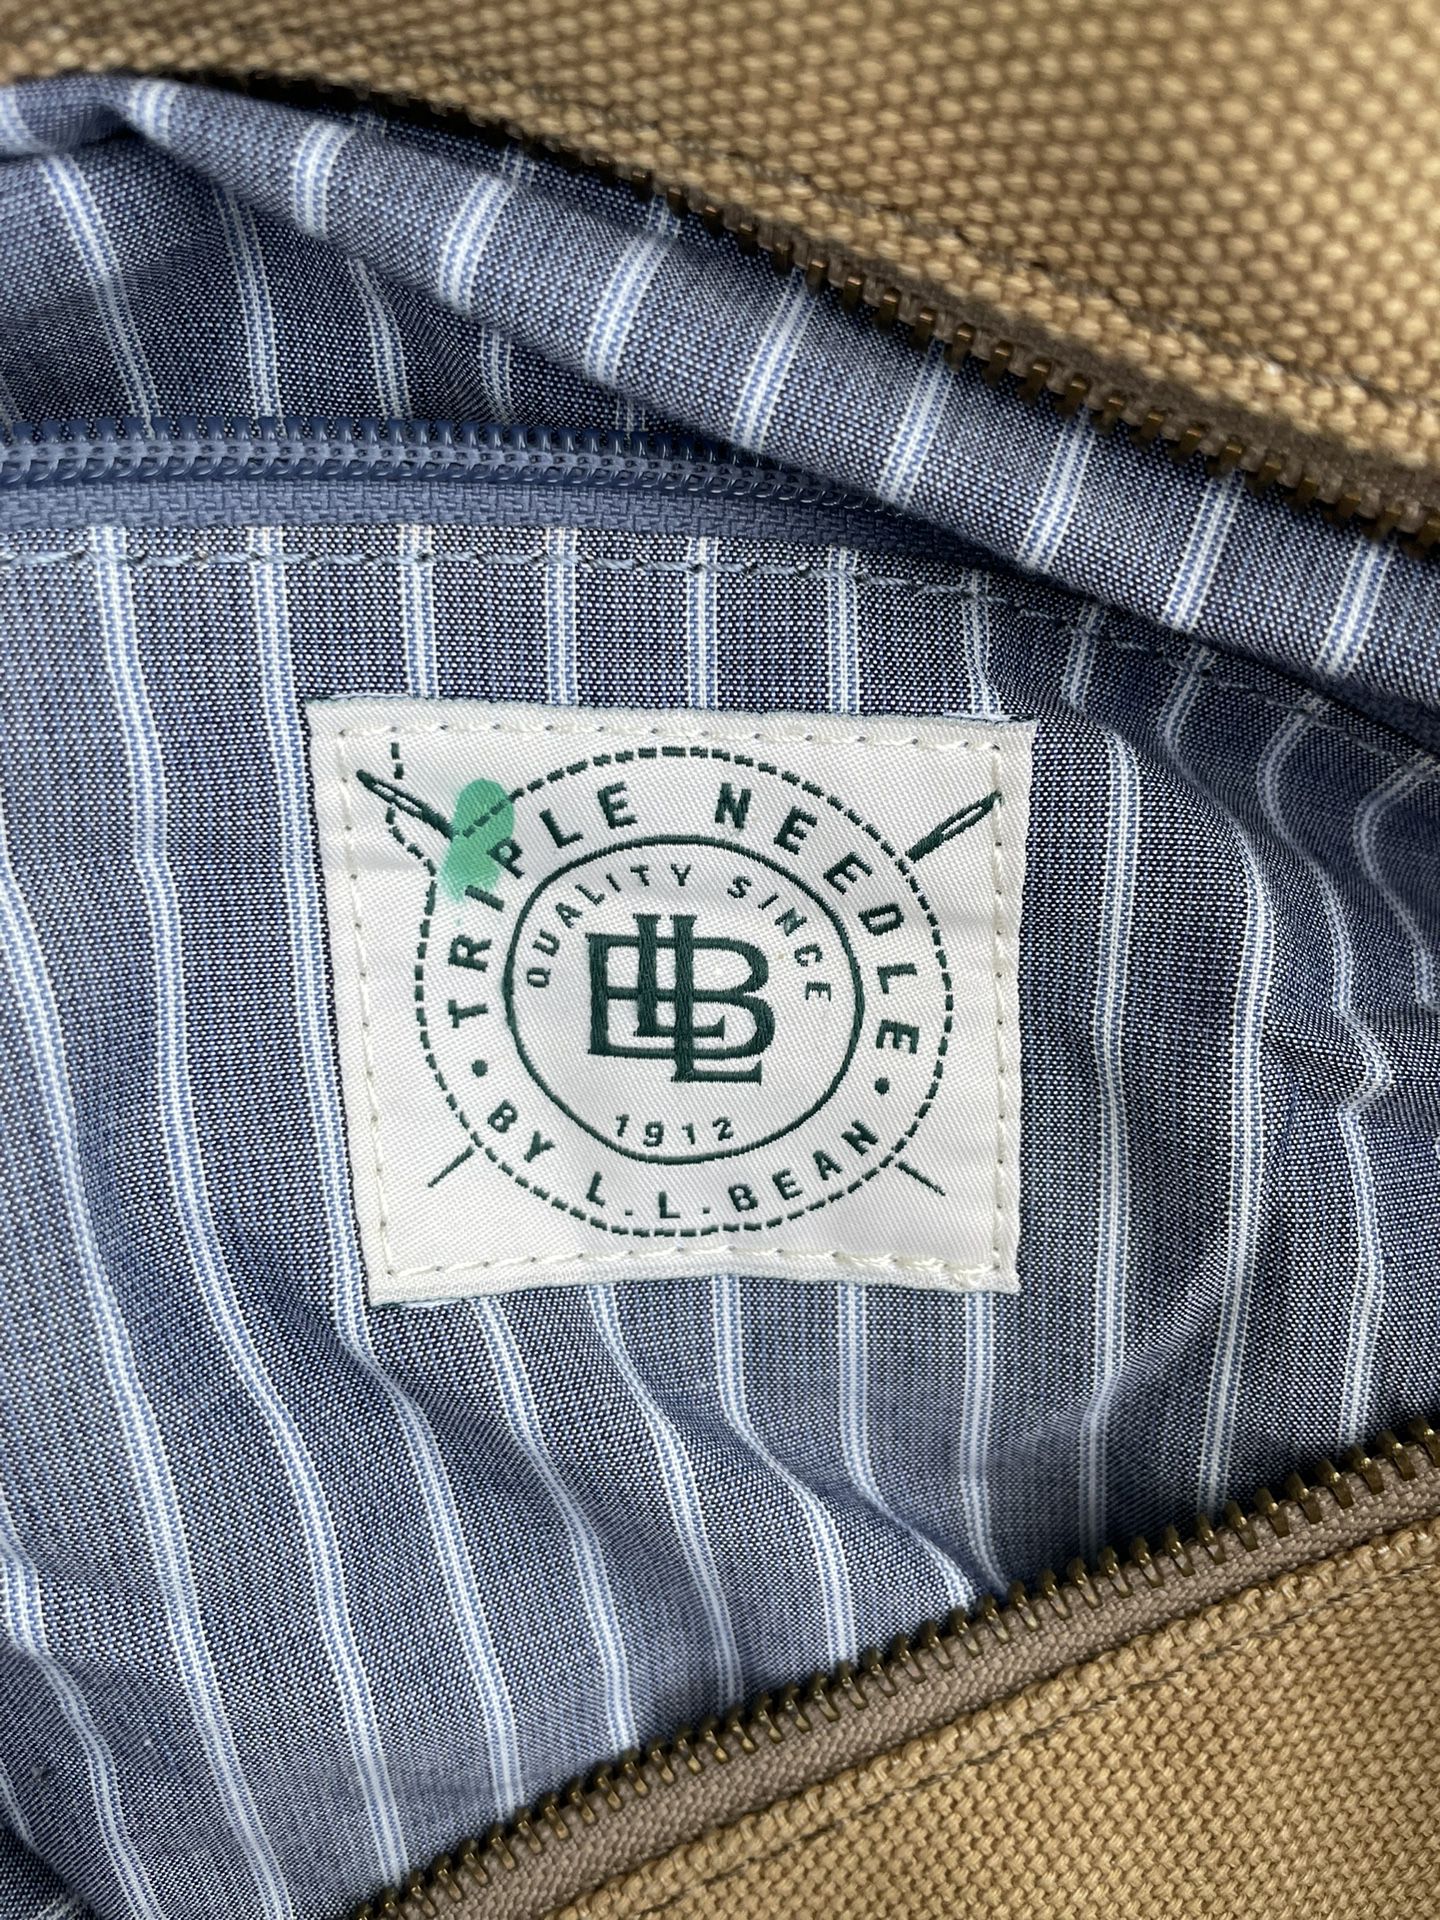 LL Bean - Vintage Tote Bags And Carry On 